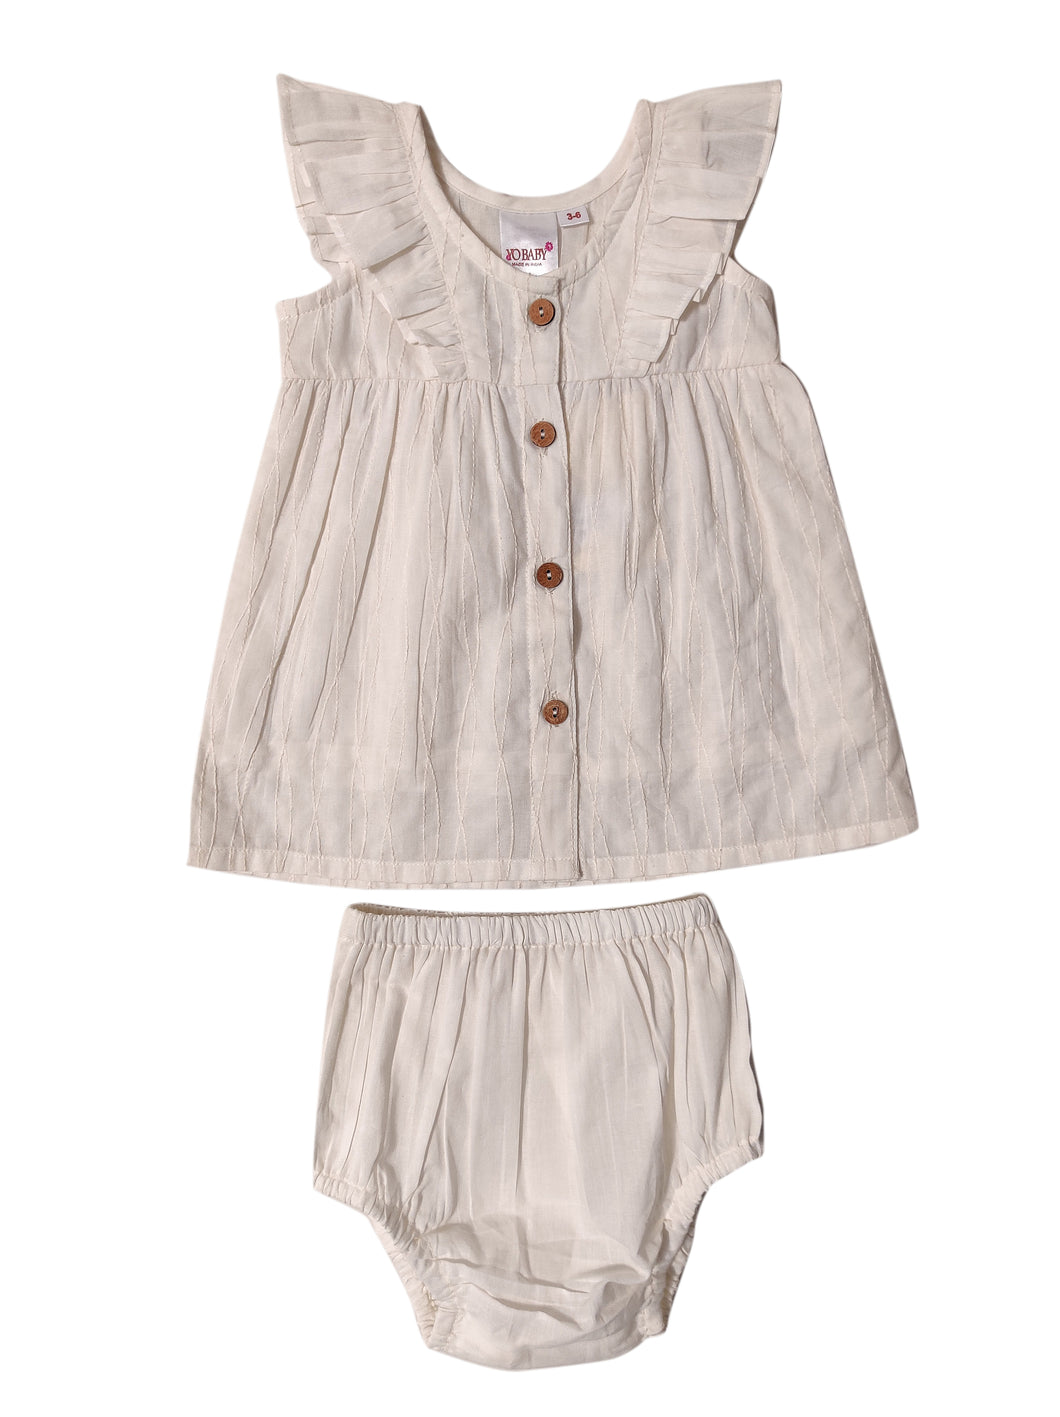 Ecru Embroidery Detail Frilled Infant Dress and Bloomer Set